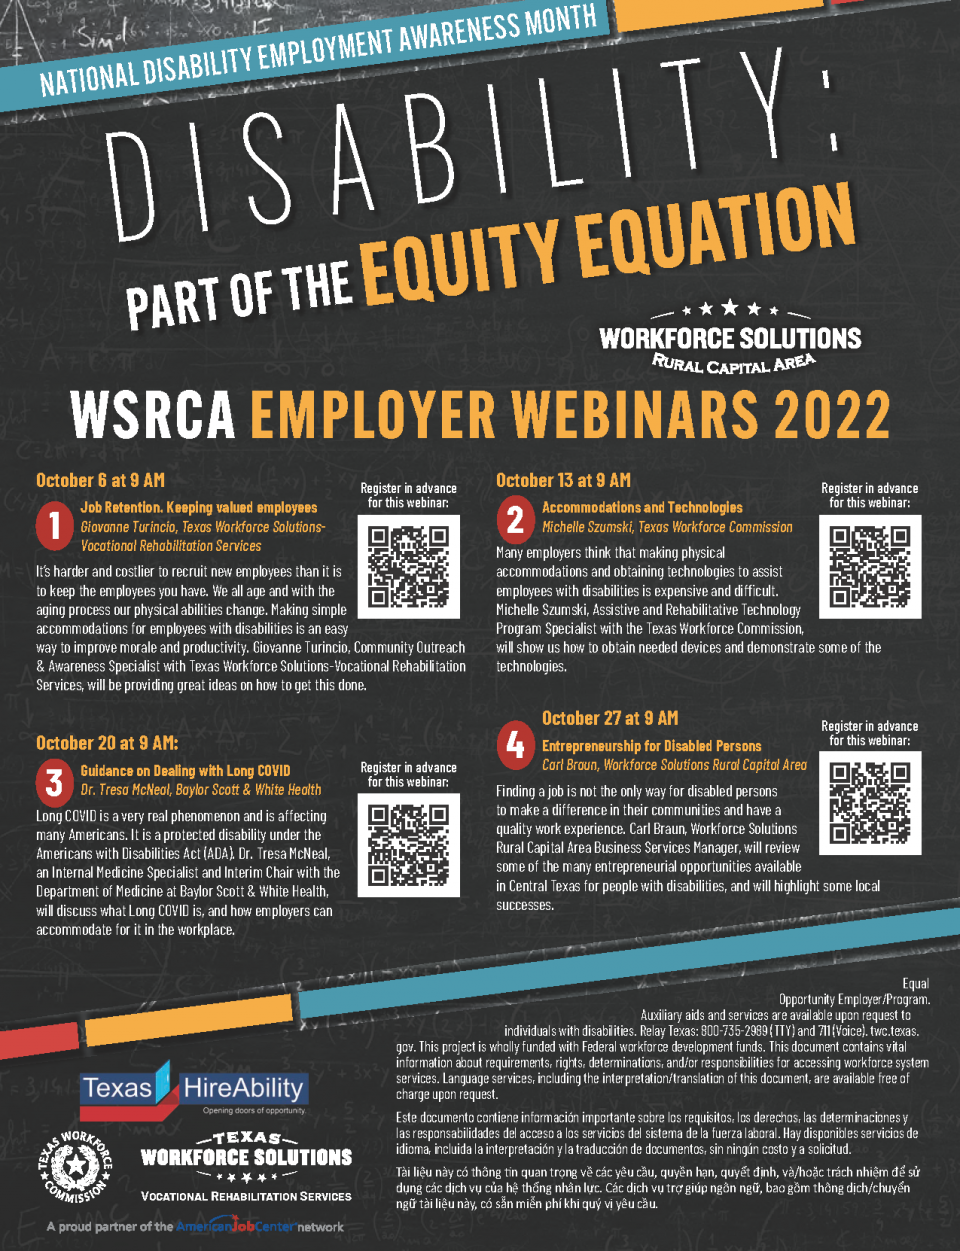 Disability: Part of the Equity Equation! Register to Participate in Free National Disability Employment Awareness Month Webinars